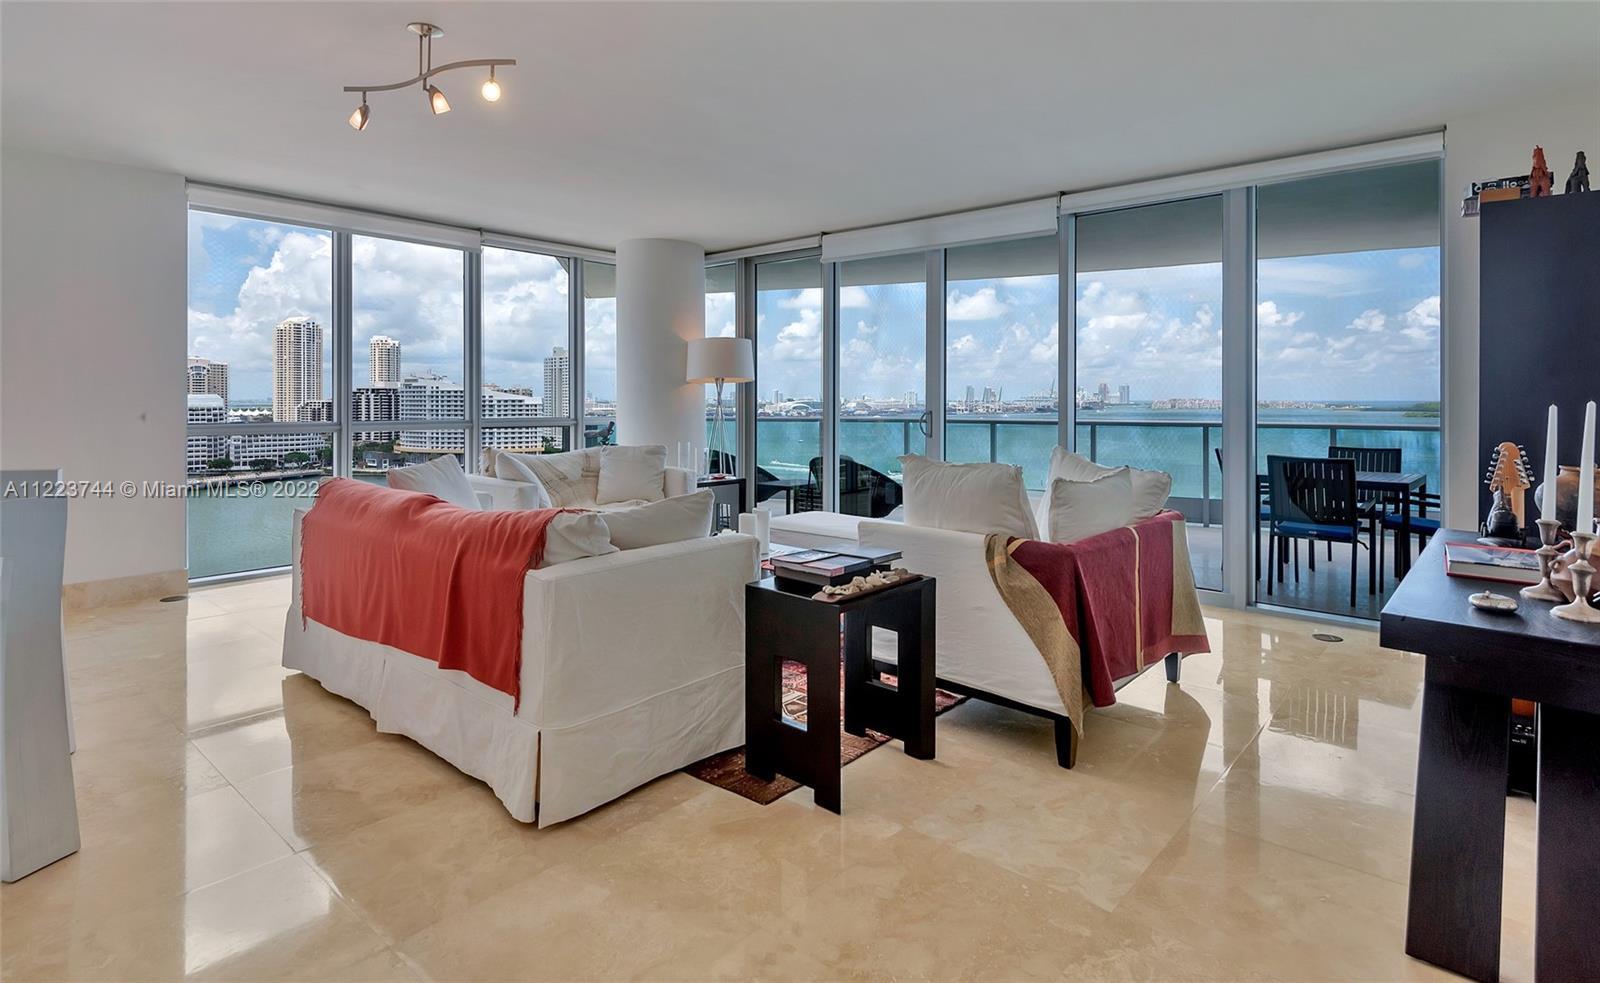 Experience the luxury of Jade Residences at Brickell with direct panoramic views of the ocean on the